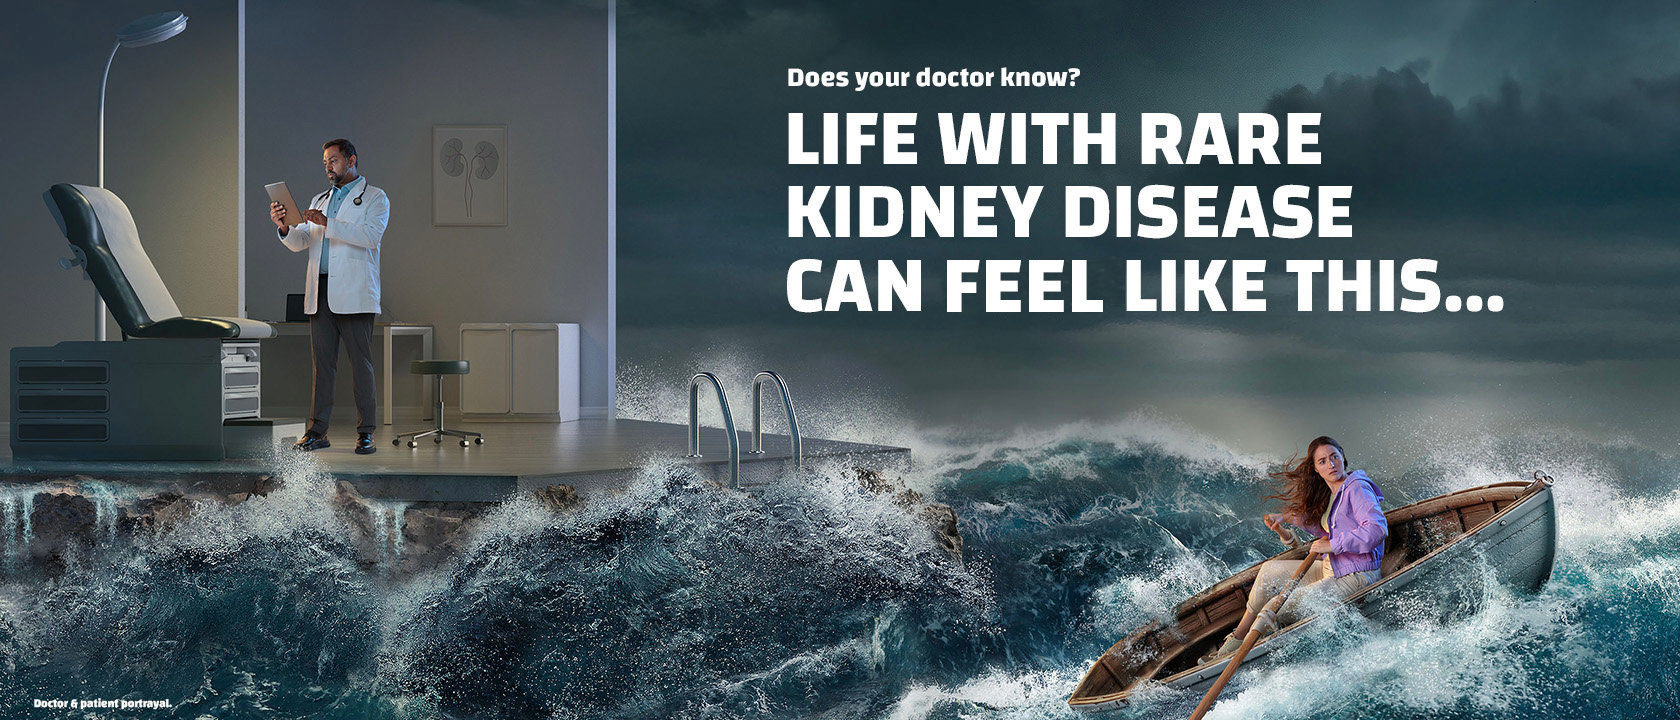 Does your doctor know? Life with rare kidney disease can look like this...